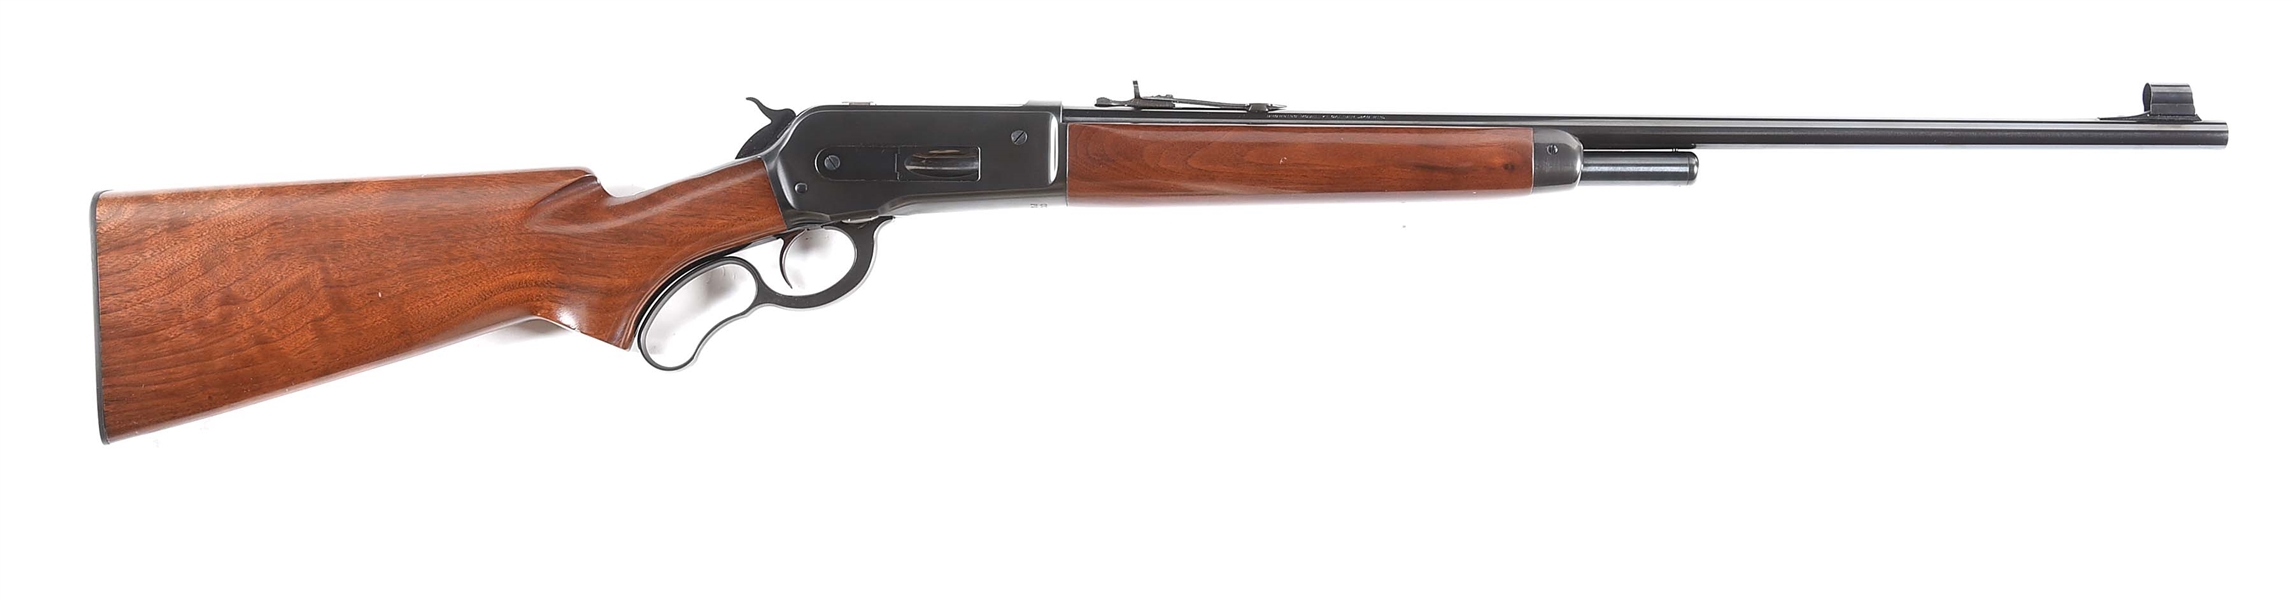 (M) BROWNING MODEL 71 LEVER ACTION RIFLE.